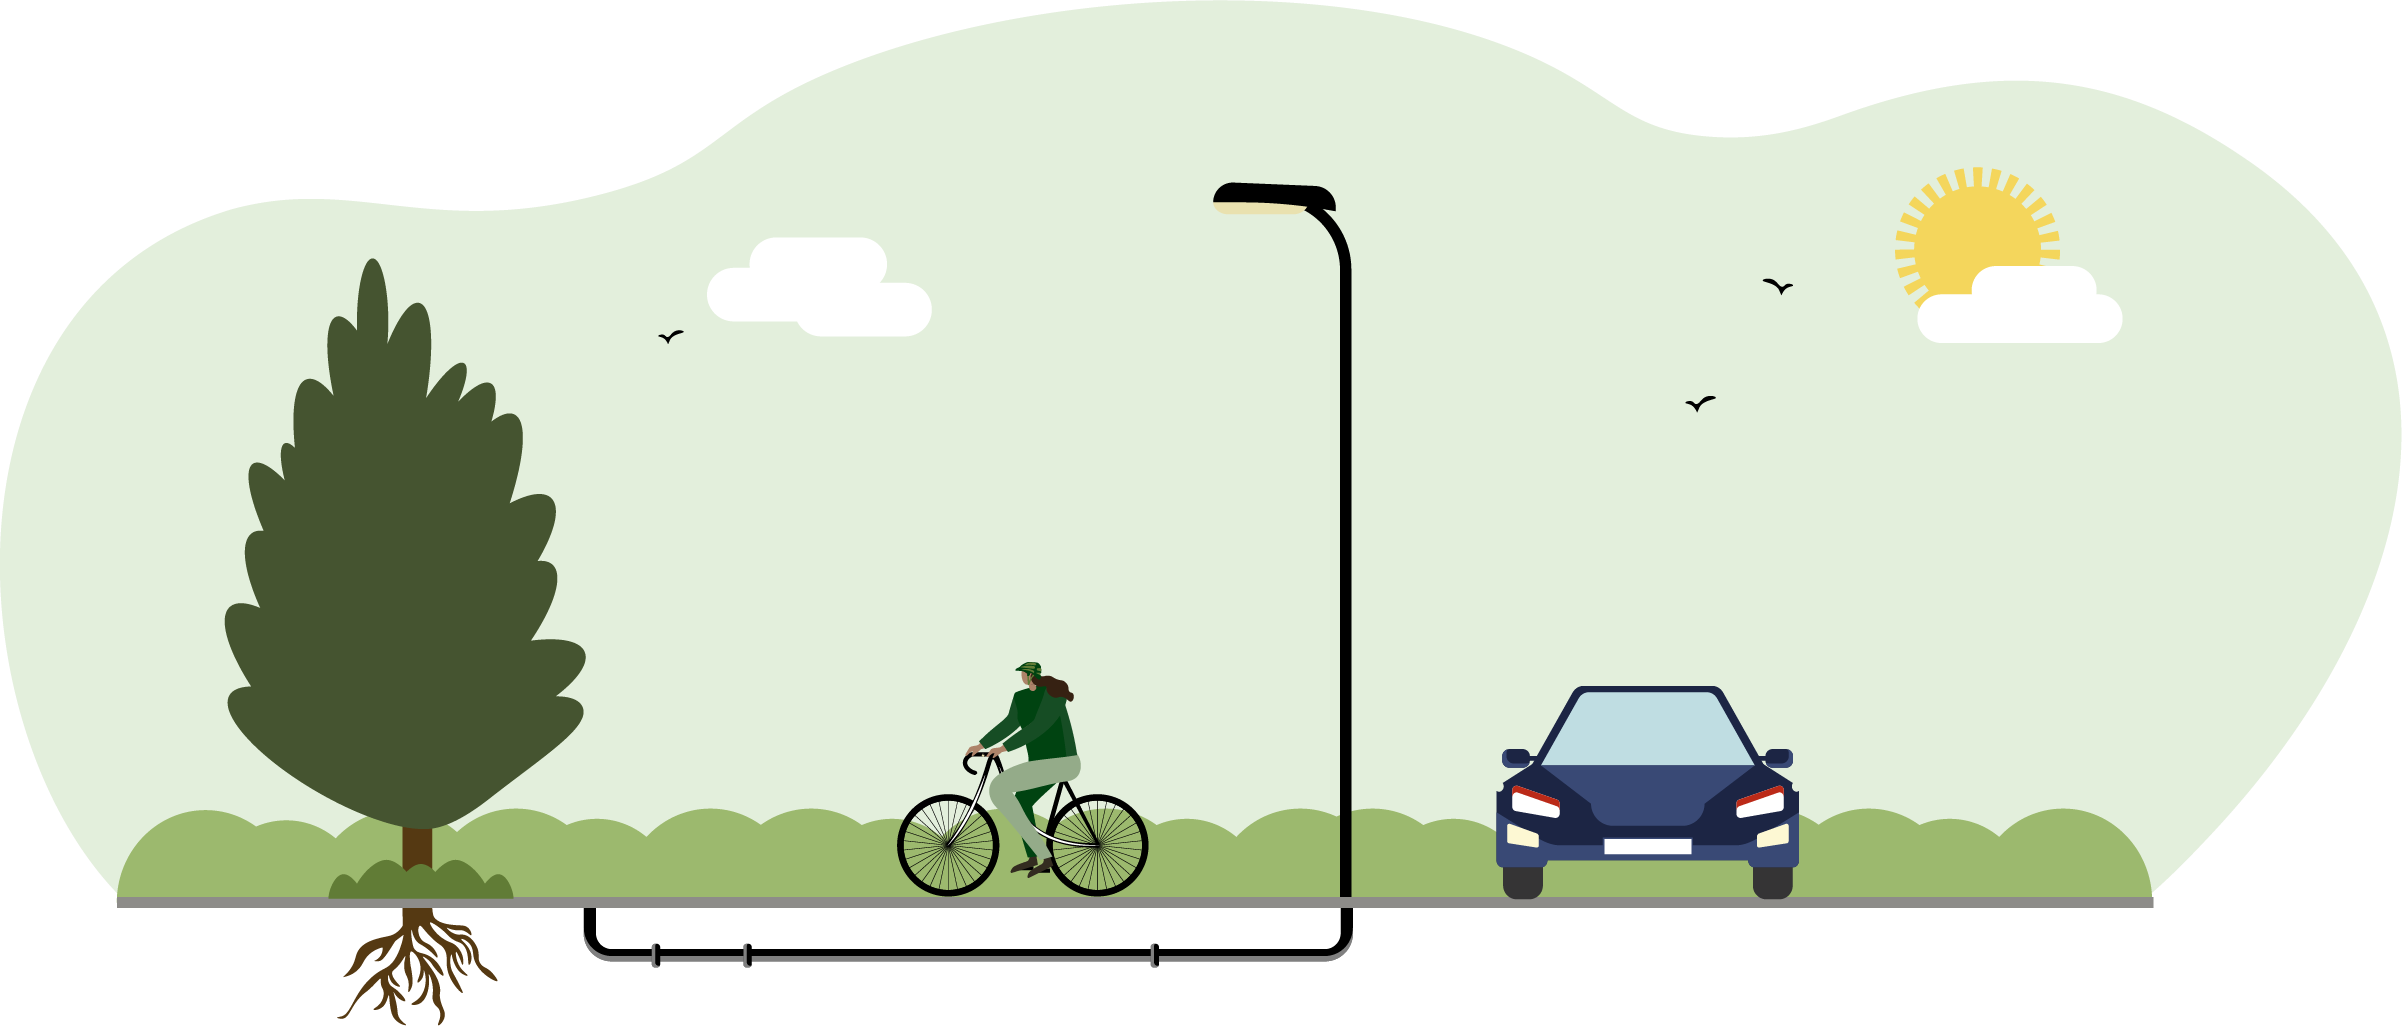 Grey_Infrastructure_-_Car_and_bike_-_800_x_250.png